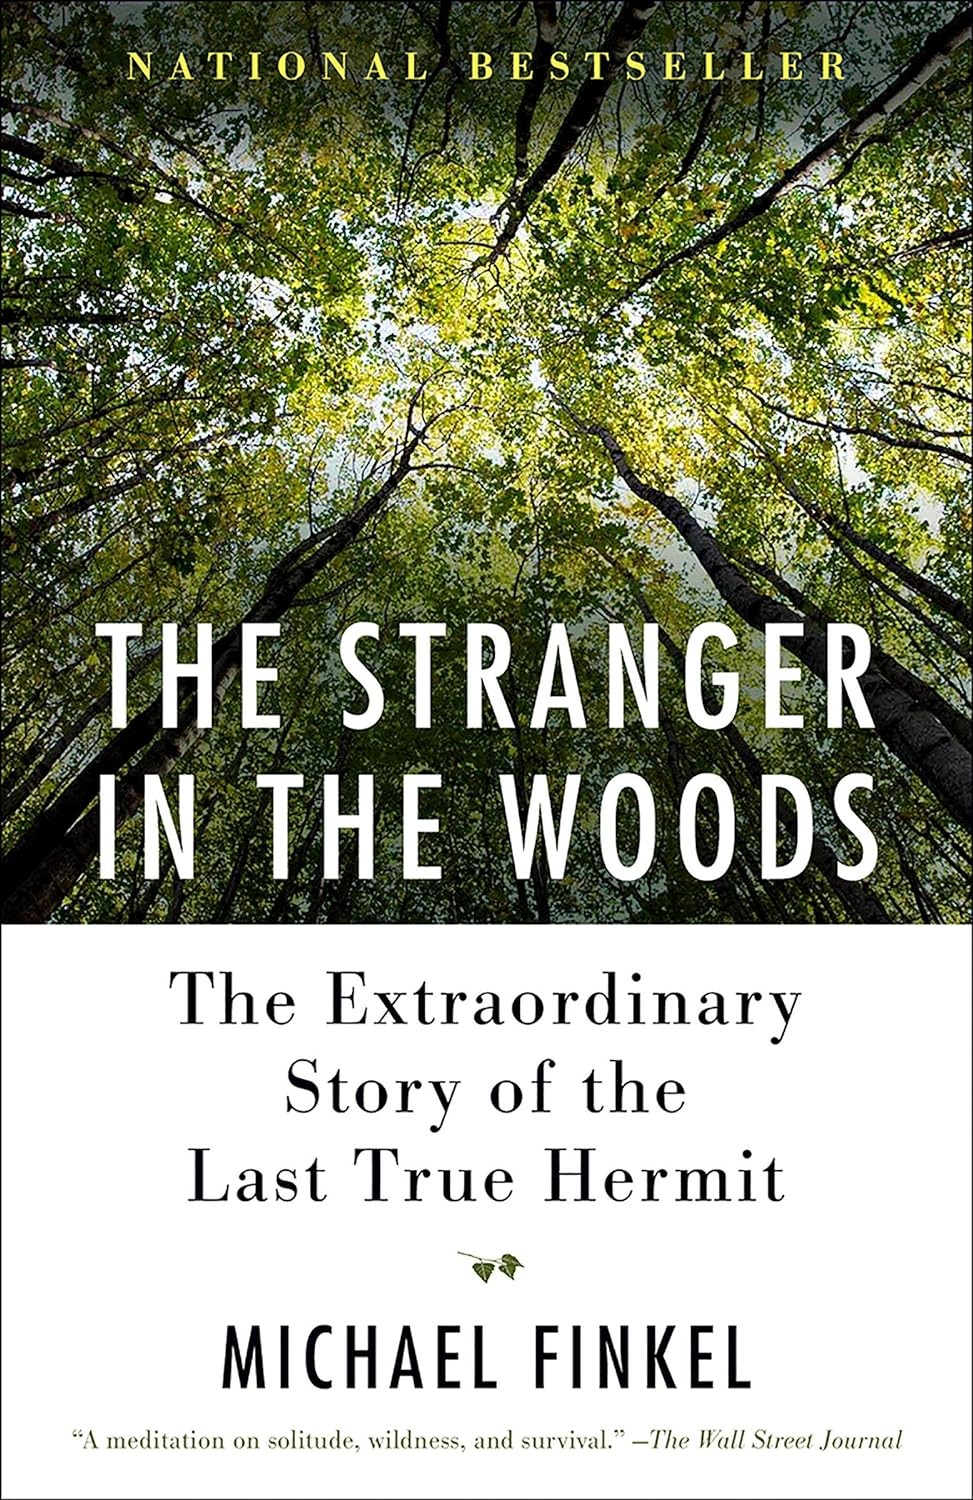 "The Stranger in the Woods" will be discussed at November 16th meeting